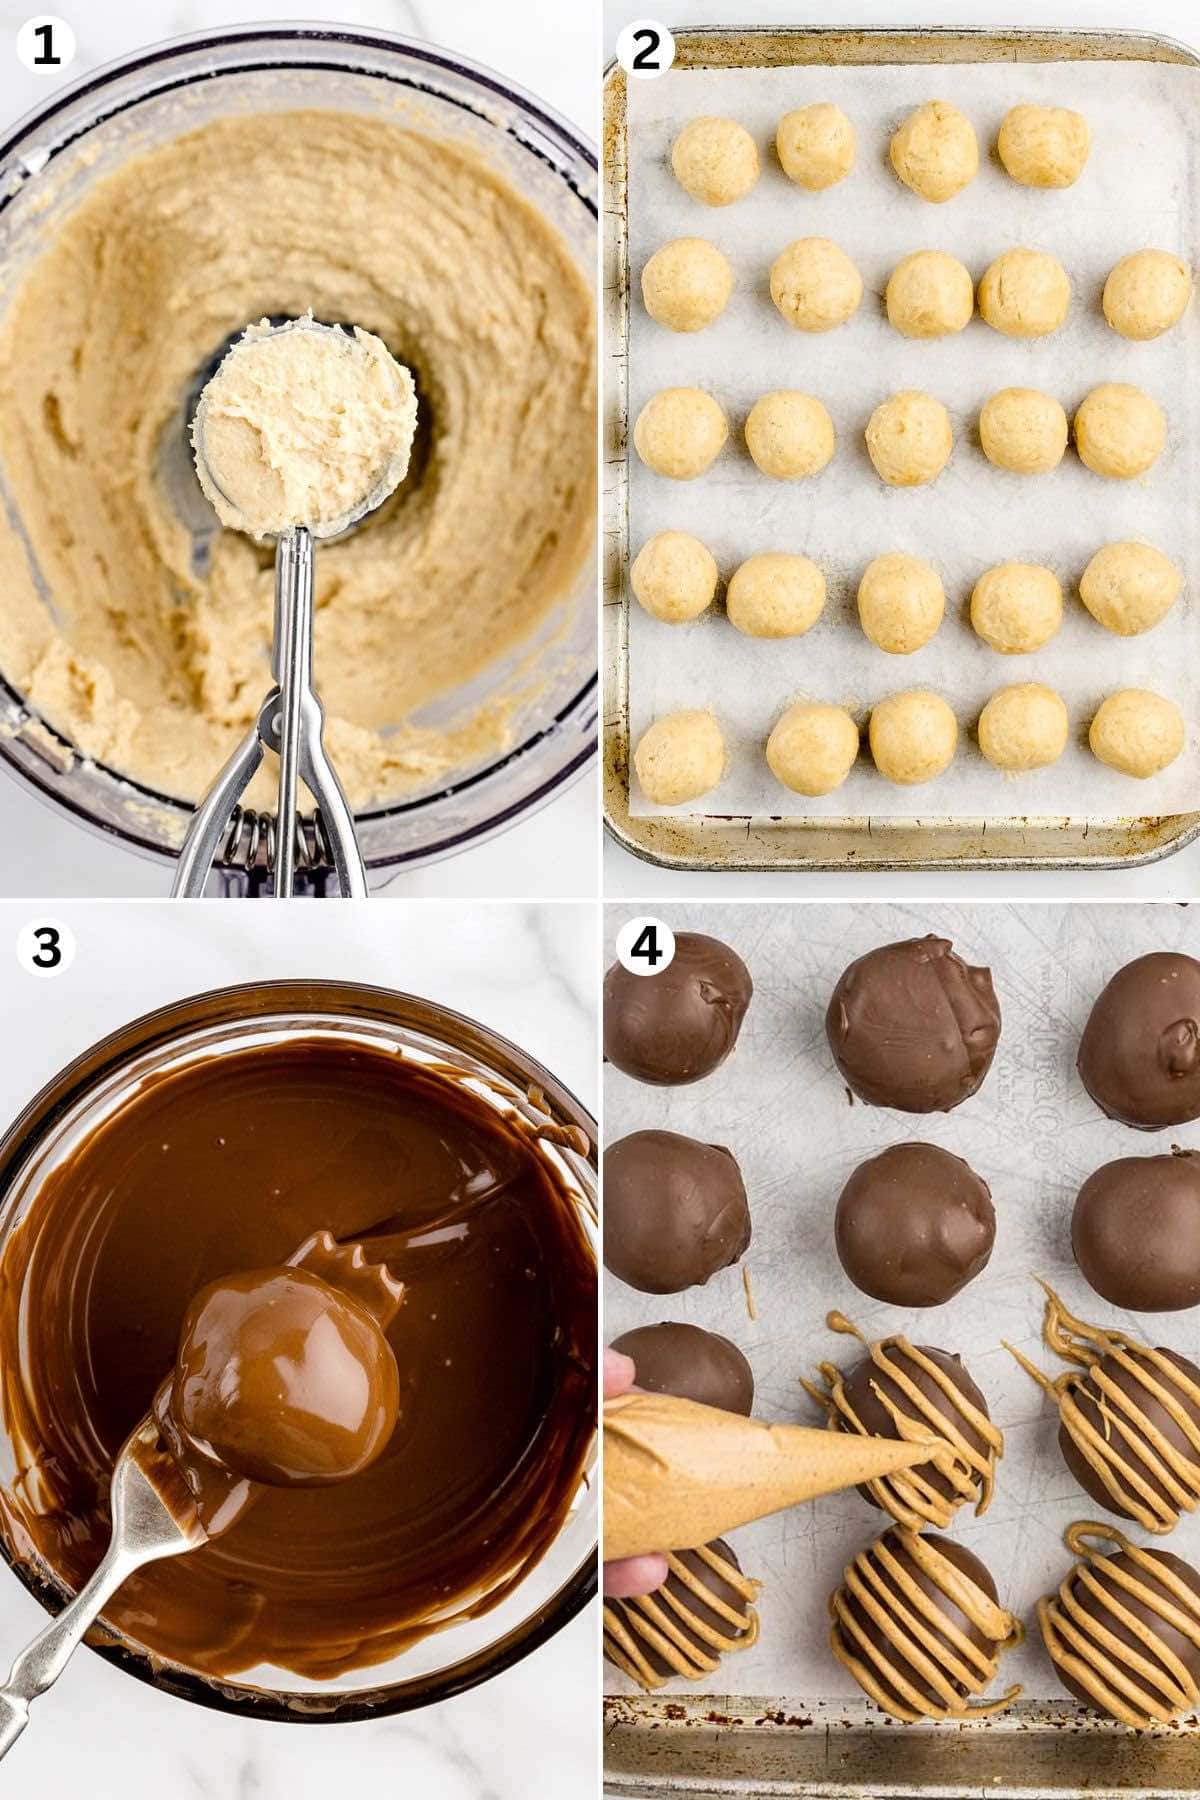 using ice cream scoop to scoop the whiskey balls mixture. roll into balls and line in baking sheet. dip into melted chocolate. drizzle with melted peanut butter chip.